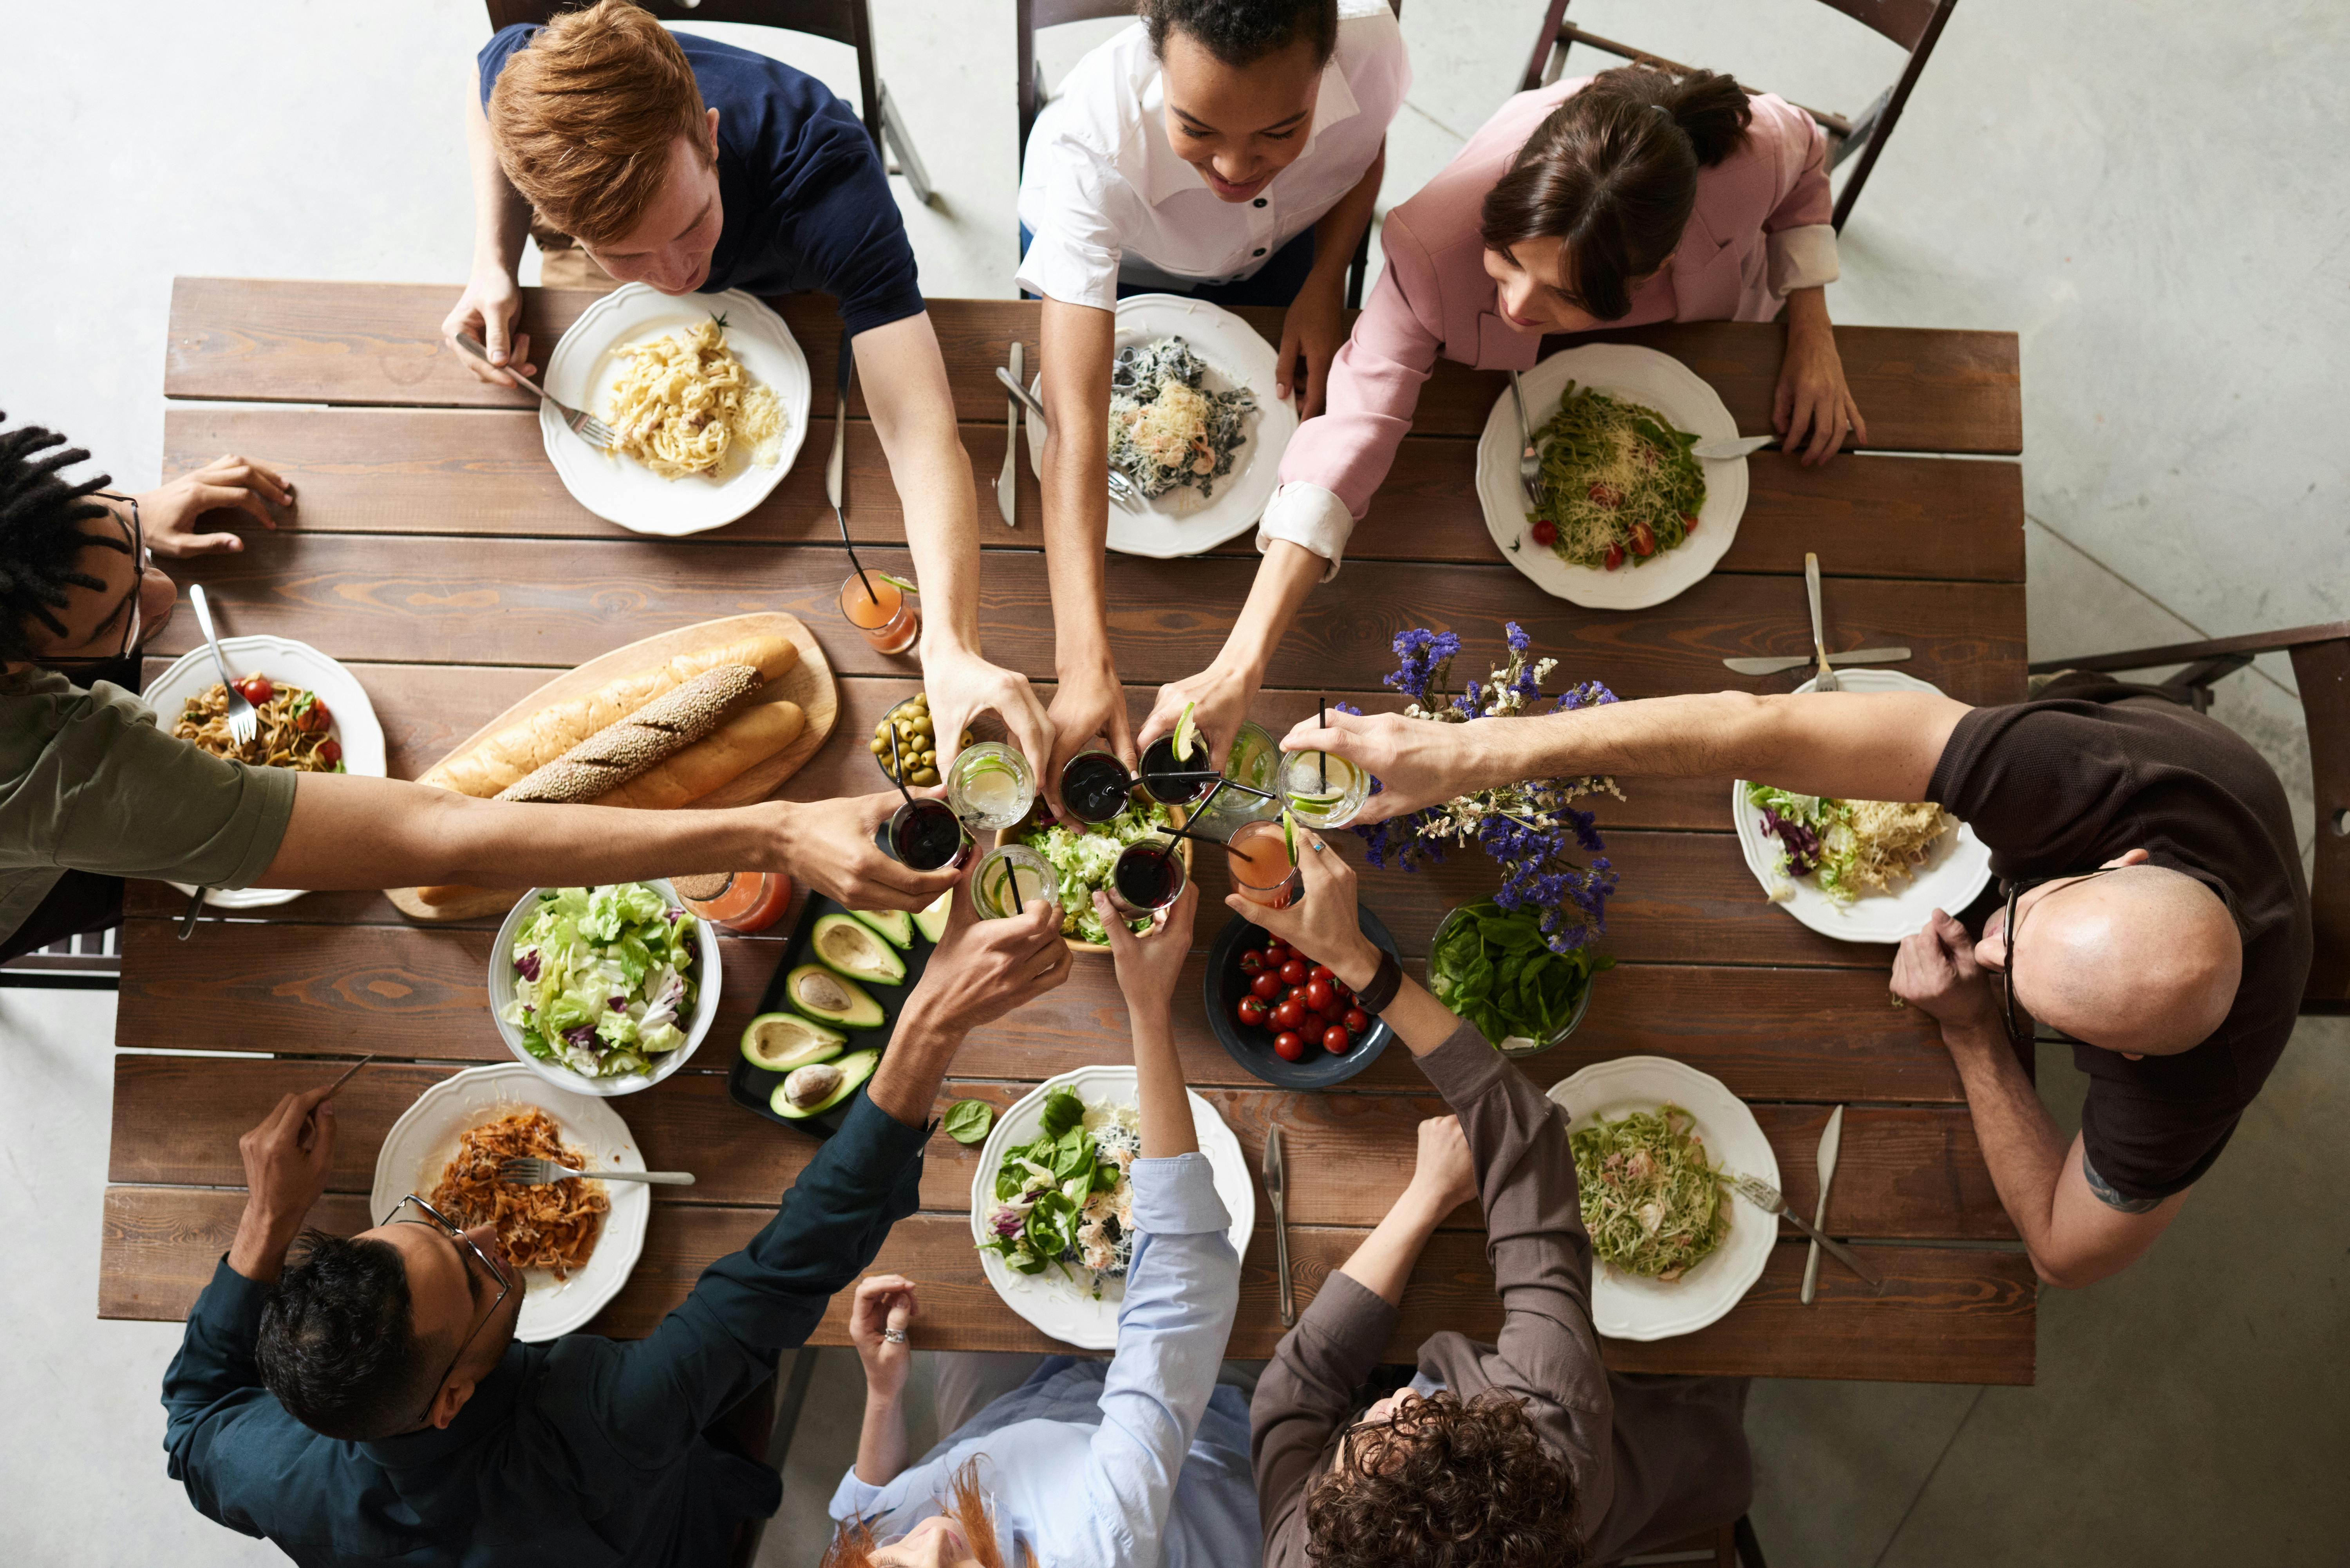 A group of people having a toast during a meal | Source: Pexels